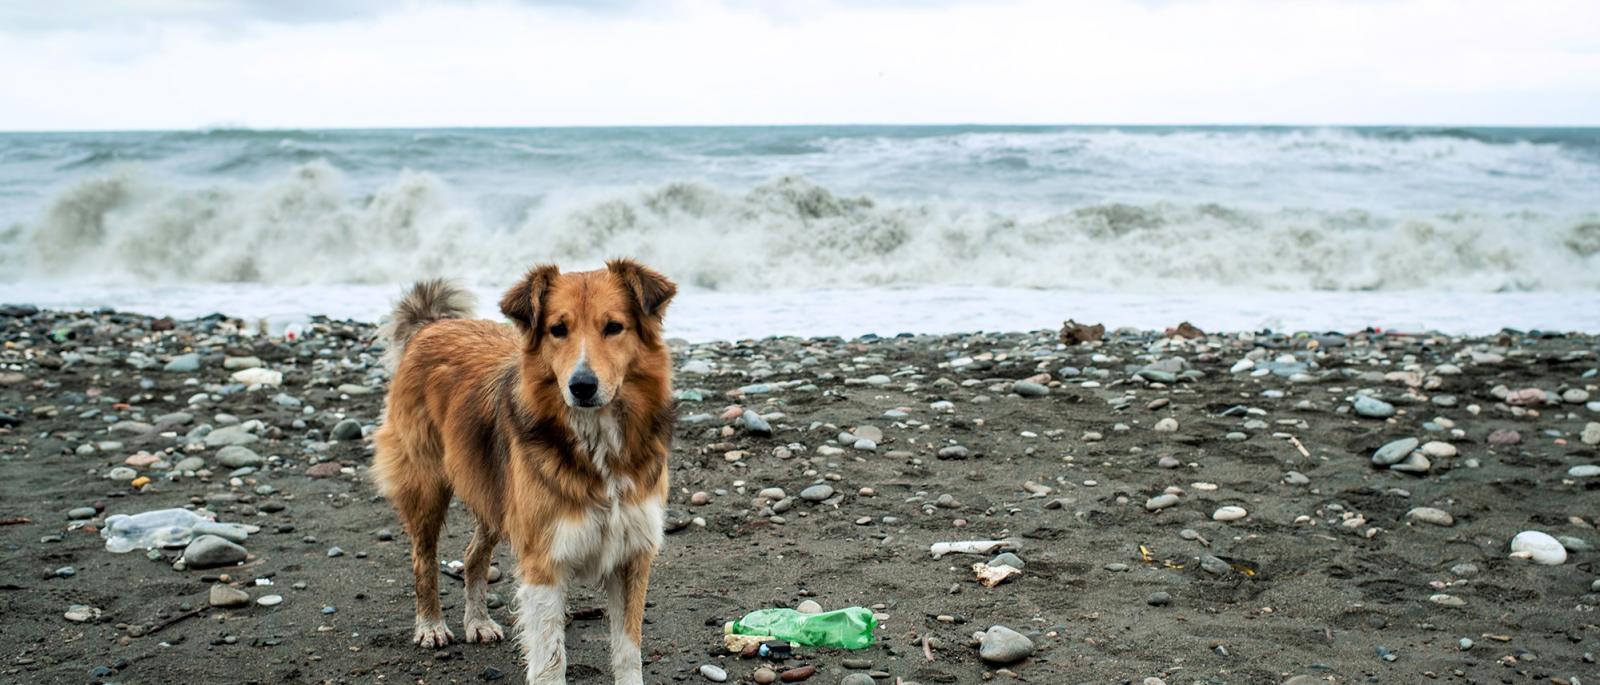 Dog on Beach with Crashing Waves in the Background